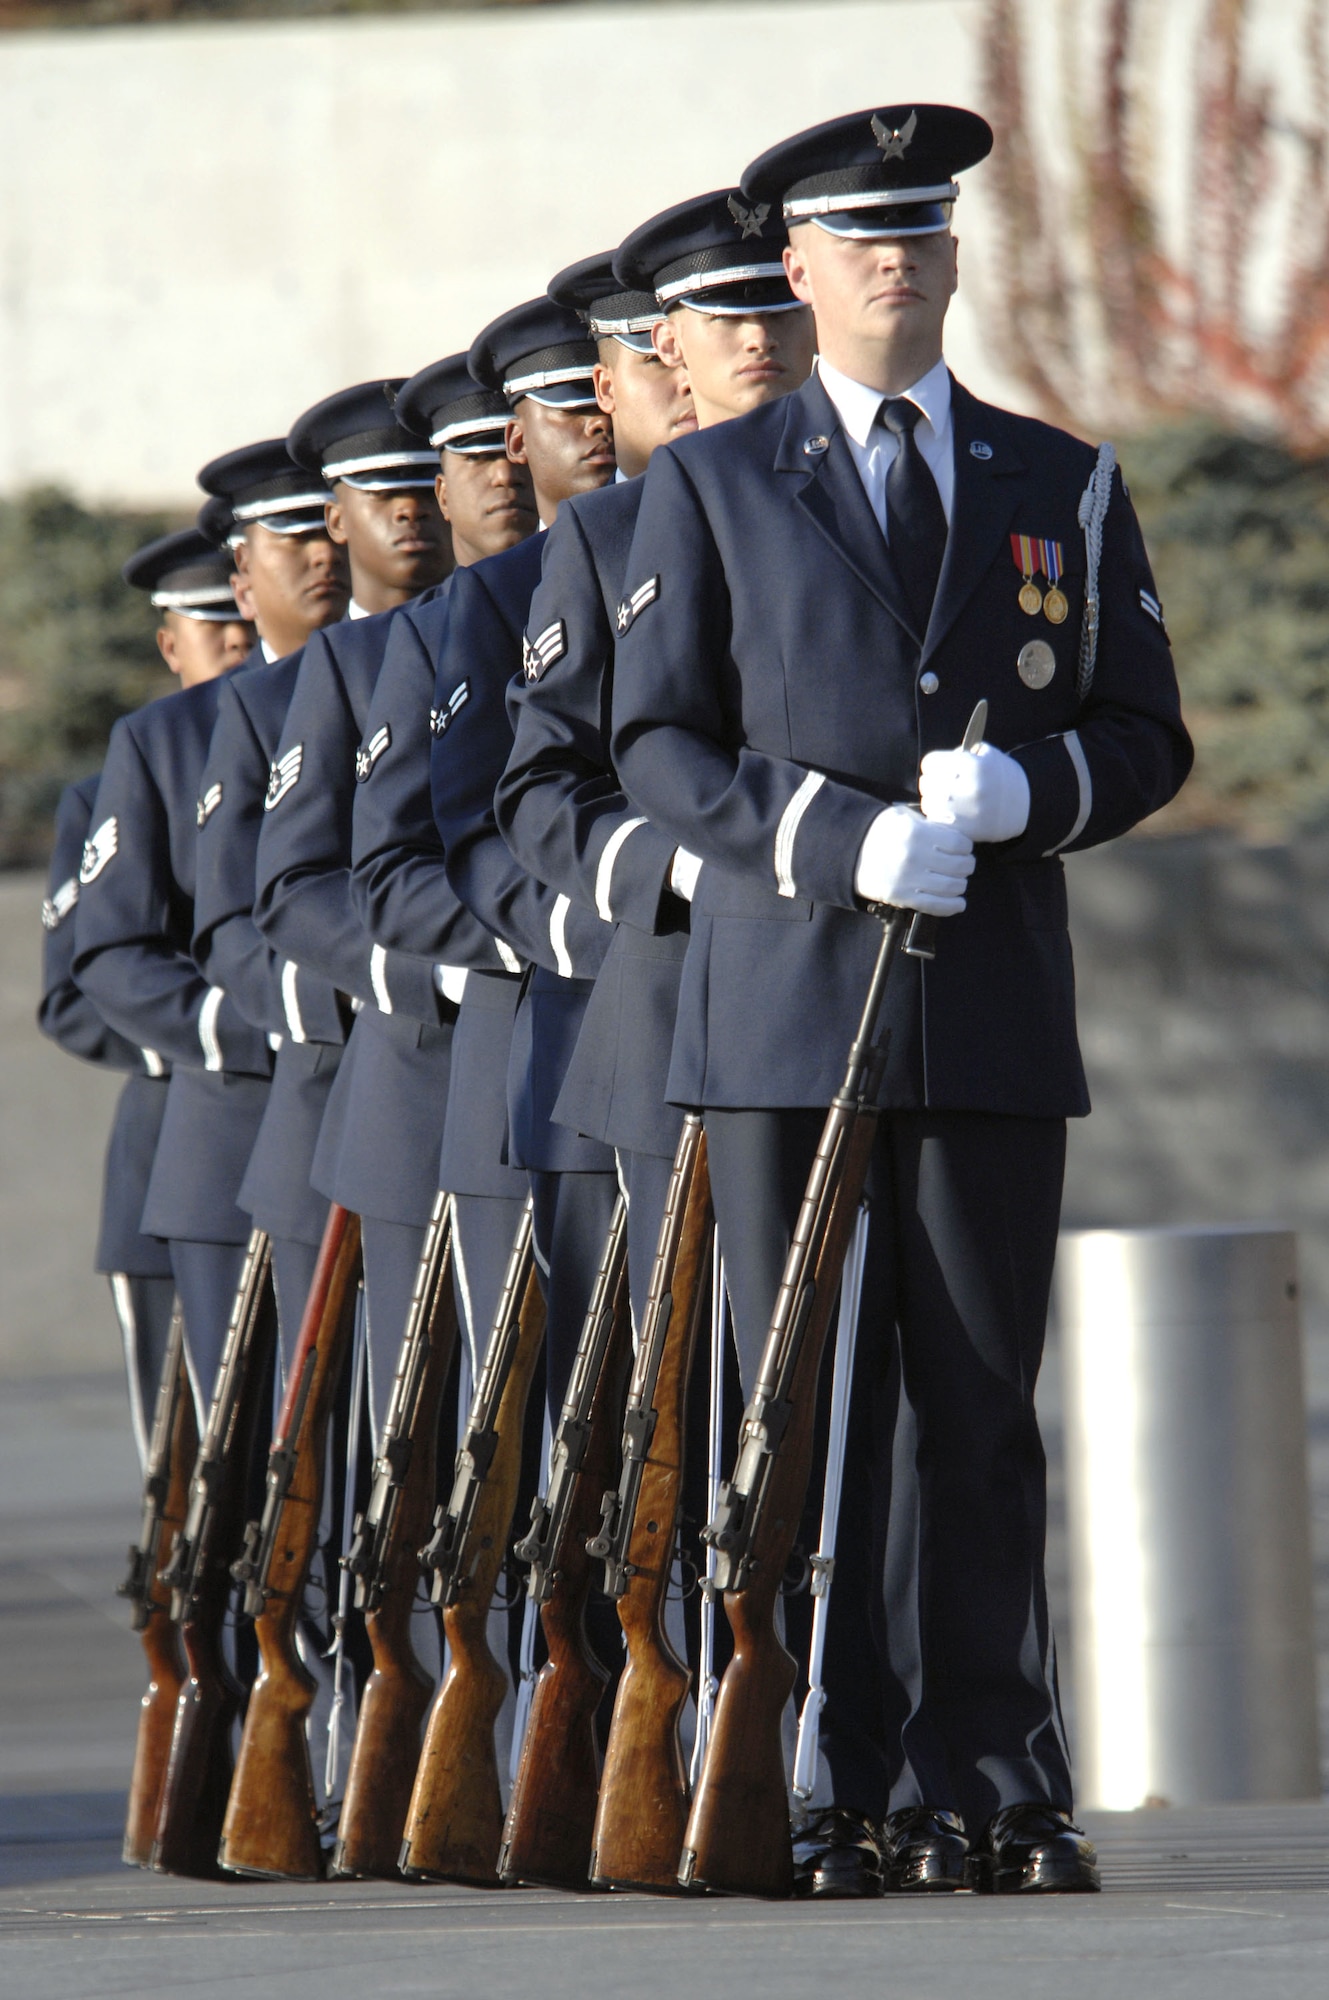 United States Air Force Honor Guard members from Bolling AFB, participate in a ceremony rememberance of fallen Air Force members from the past and present Nov. 10 in Arlington, Va. (U.S. Air Force photo/Tech. Sgt. Cohen Young)